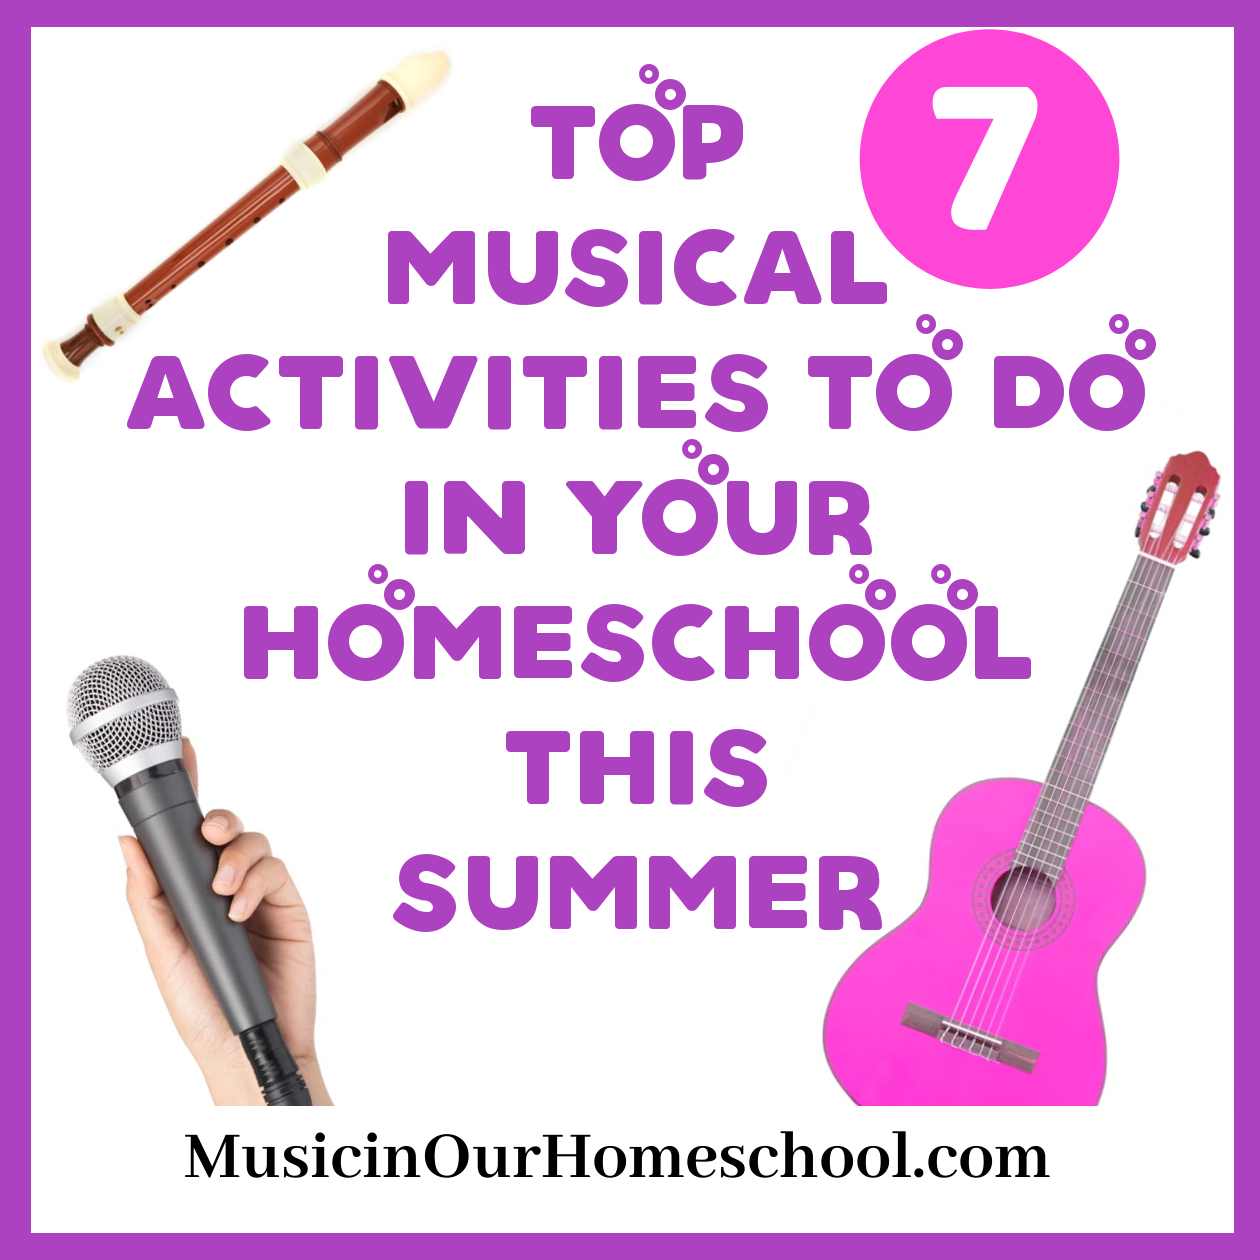 Top 7 Musical Activities to do in your Homeschool this Summer squ